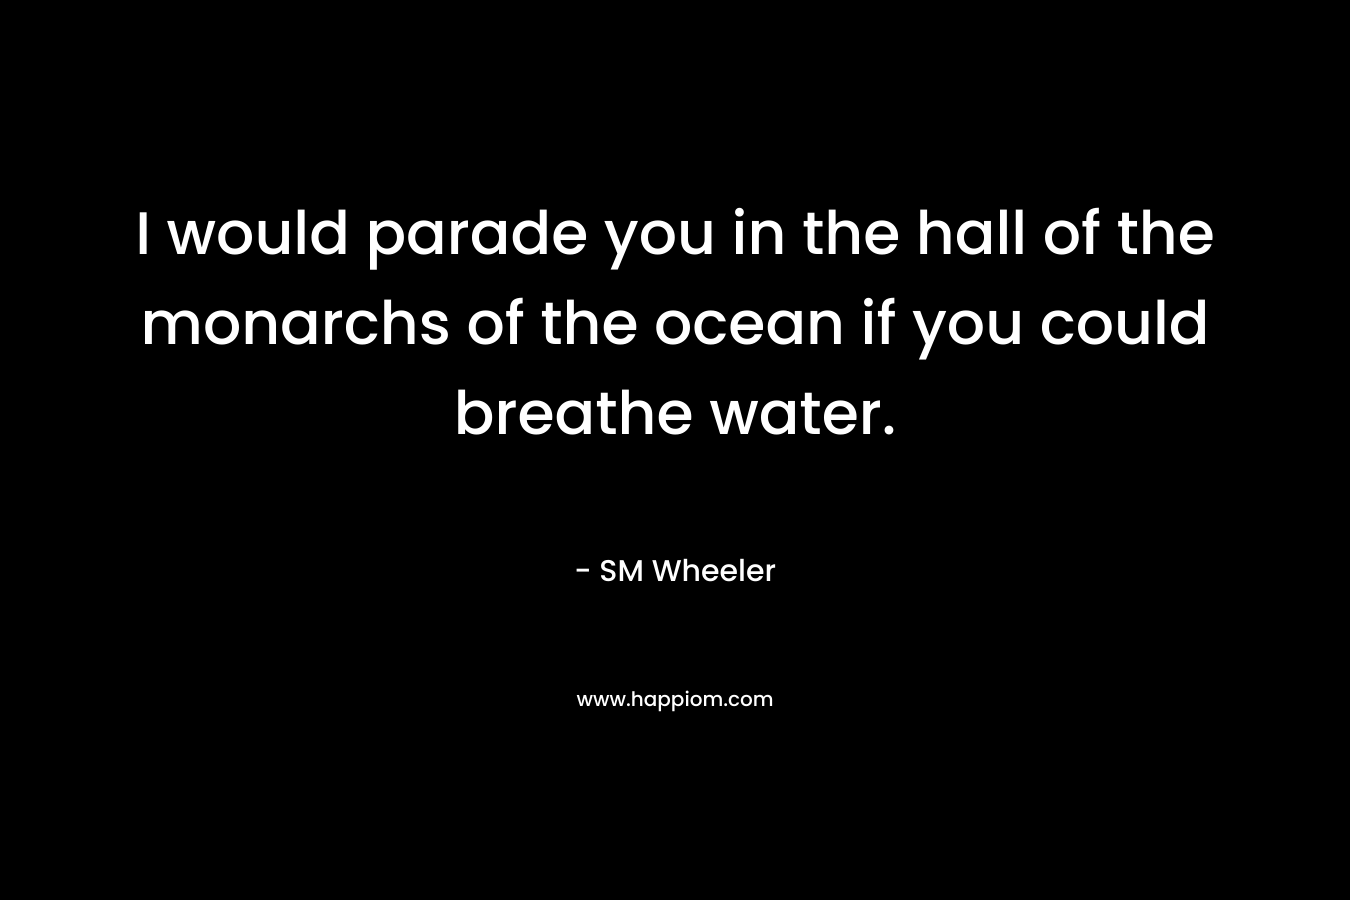 I would parade you in the hall of the monarchs of the ocean if you could breathe water.